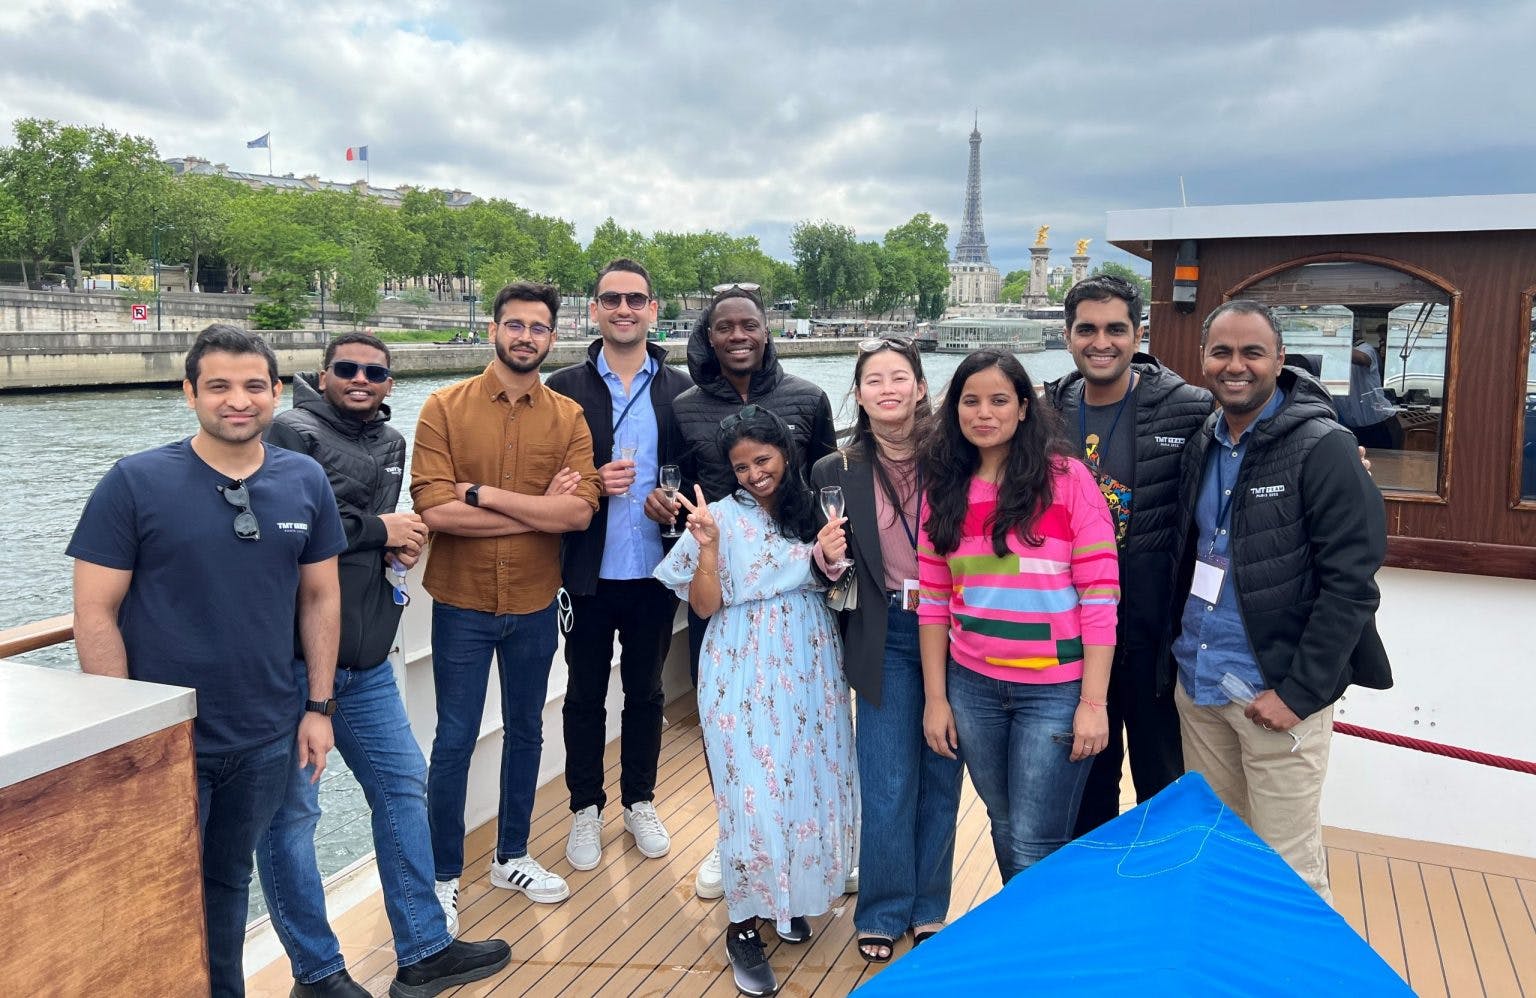 Anish Pahwa & Shikhar Jamuar with a group of people beside a Paris river with the Eiffel tower in the background.